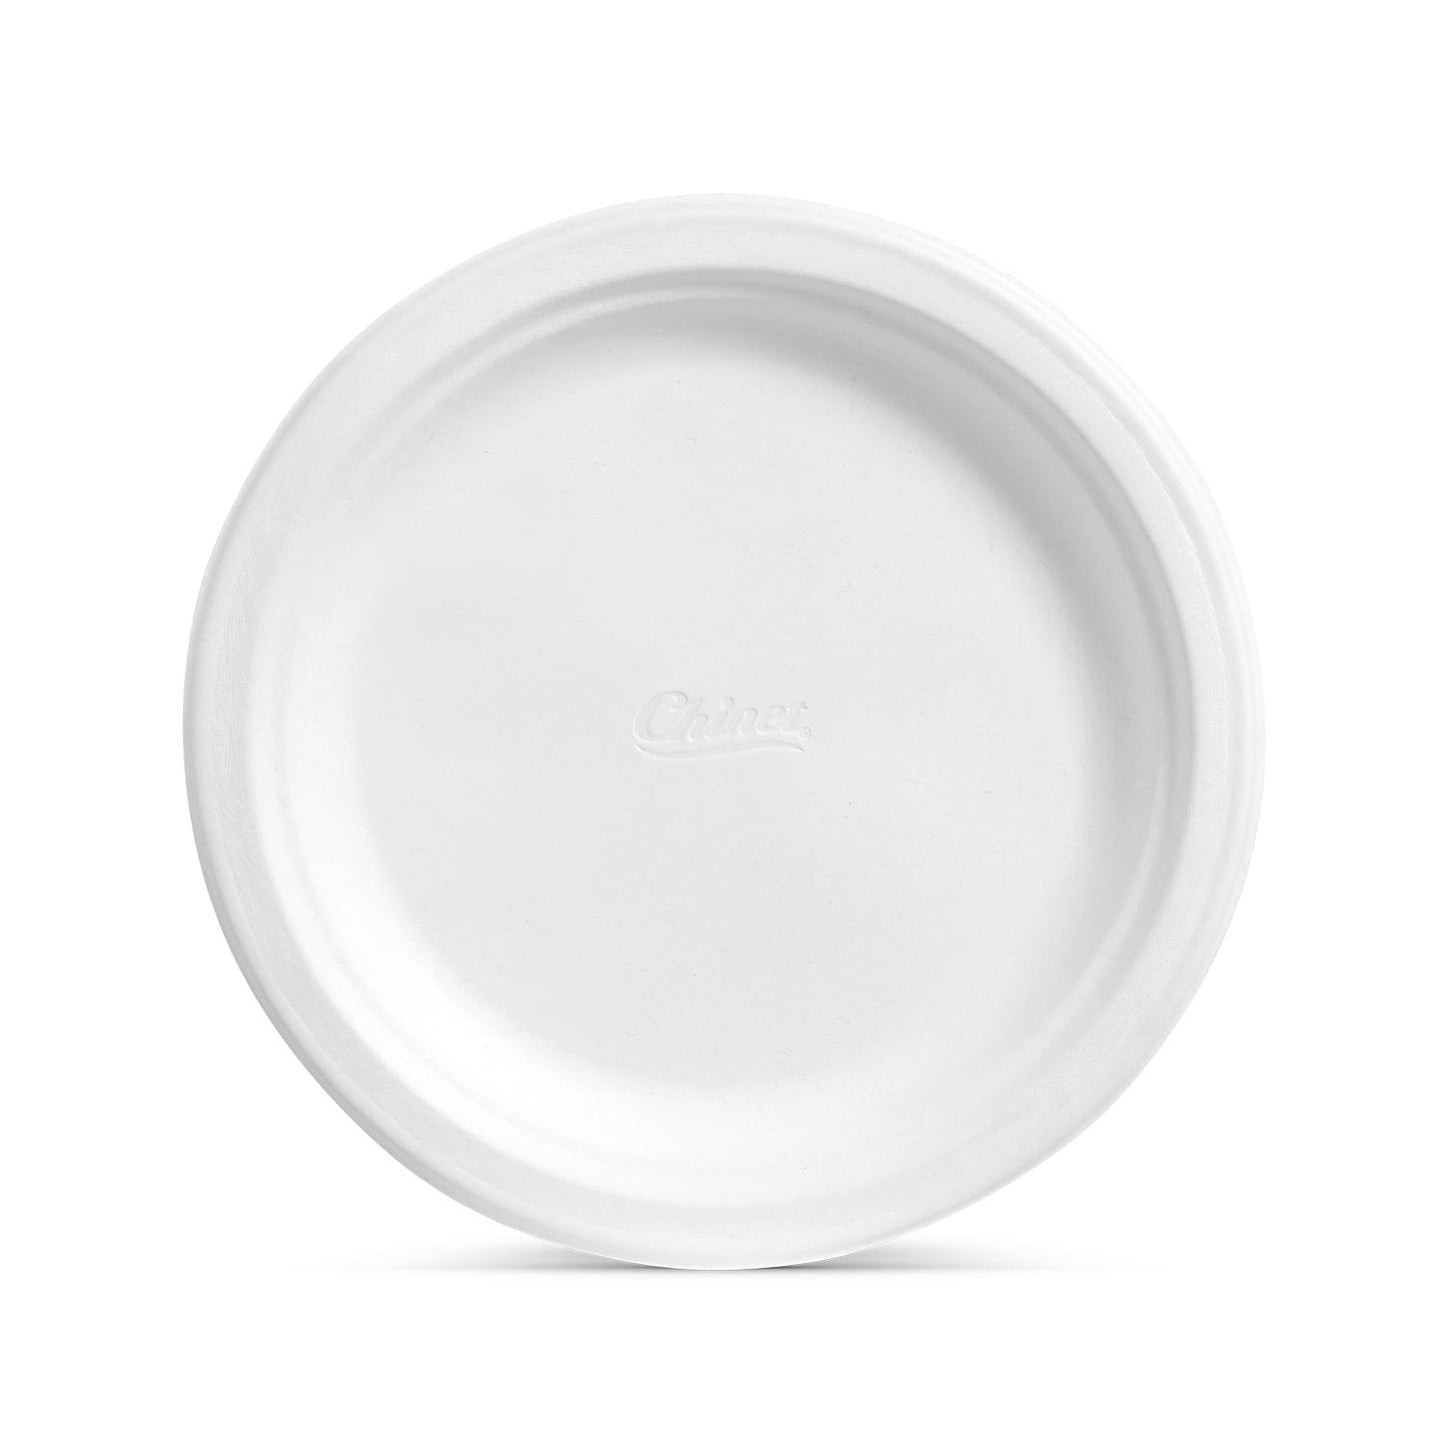 Chinet Classic Dinner Plates, 10.3/8 inch (165 ct.-White)